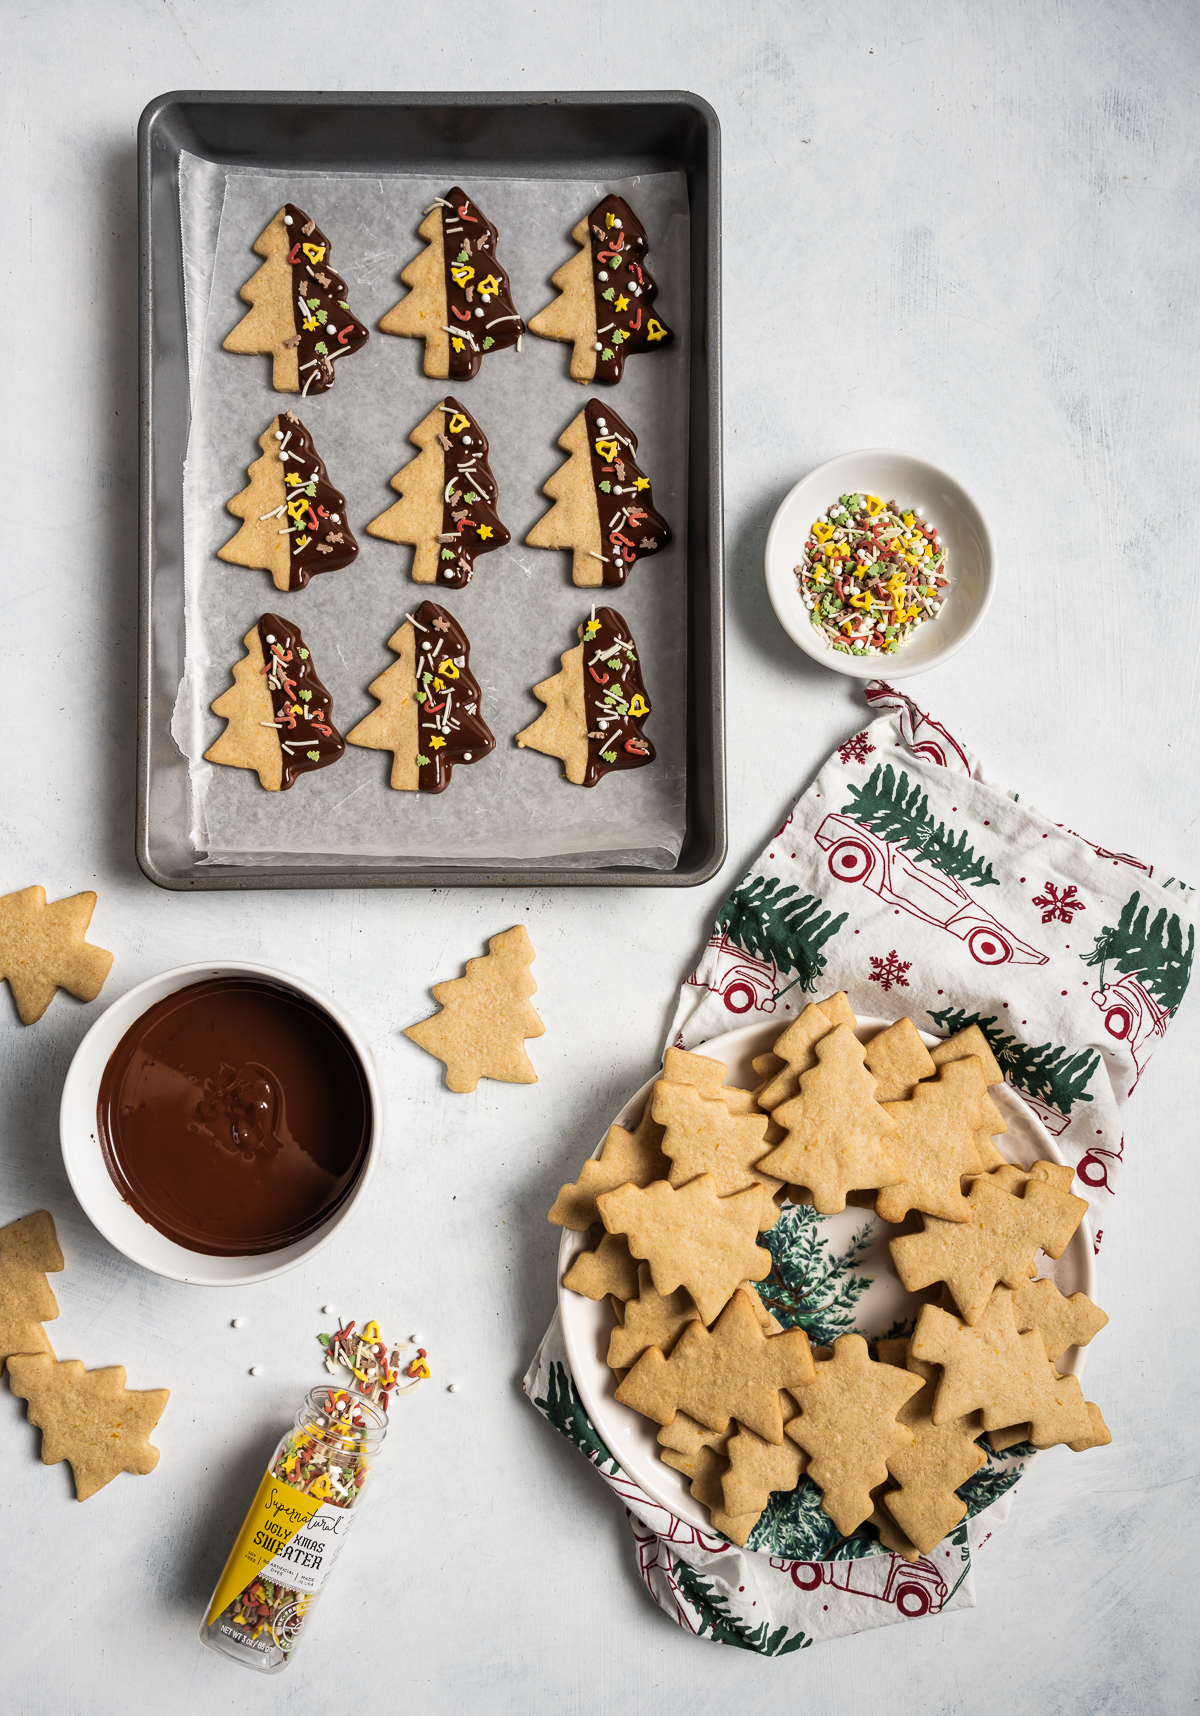 tree shaped cinnamon shortbread cookies half dipped in chocolate with sprinkles on baking sheet  plate of tree shaped cookies bowl of sprinkles bowl of melted chocolate